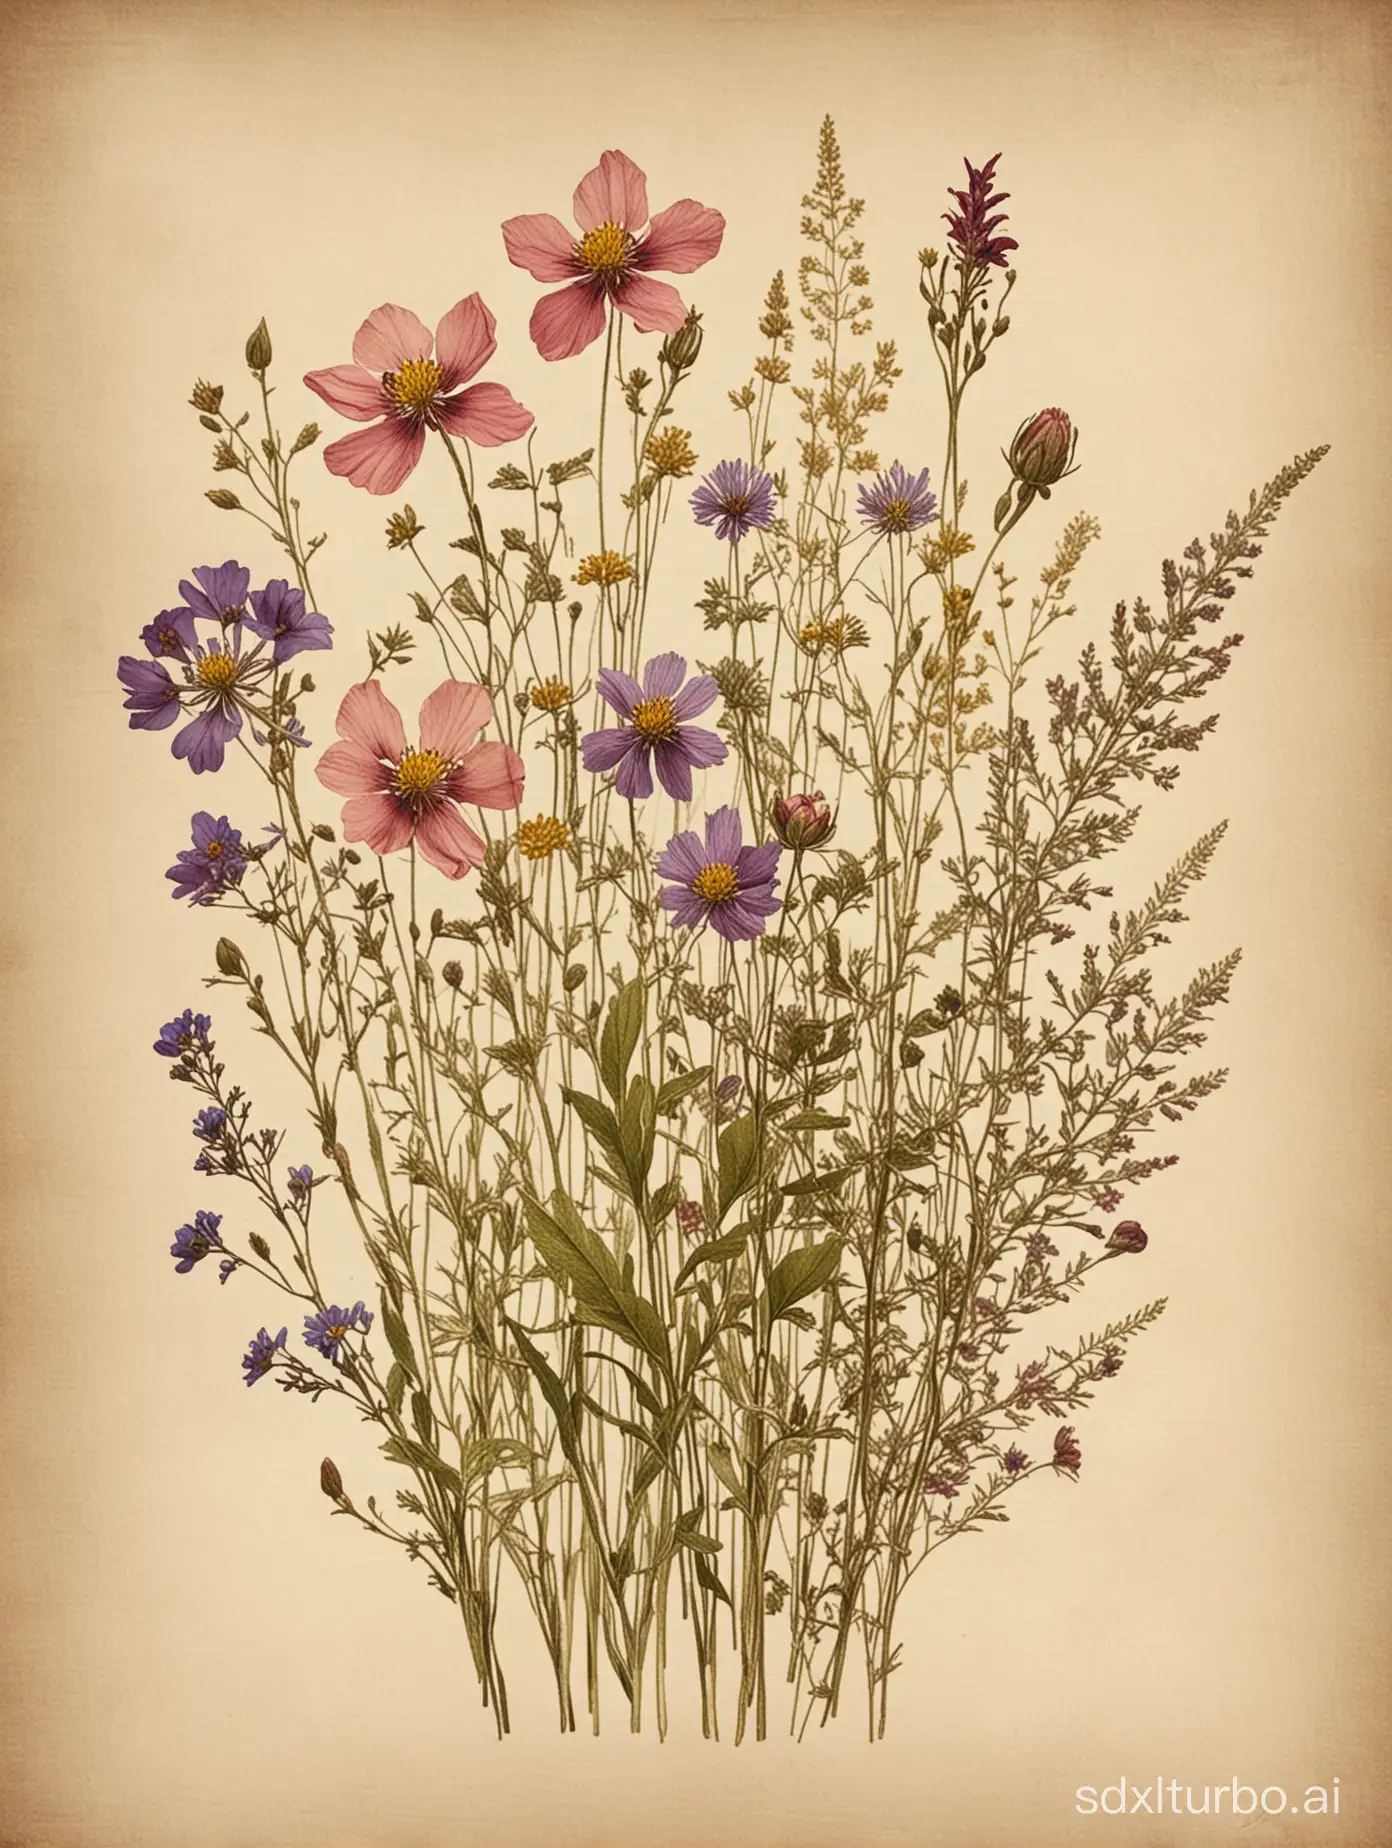 A beautiful image of pressed wild flowers in a vintage style.